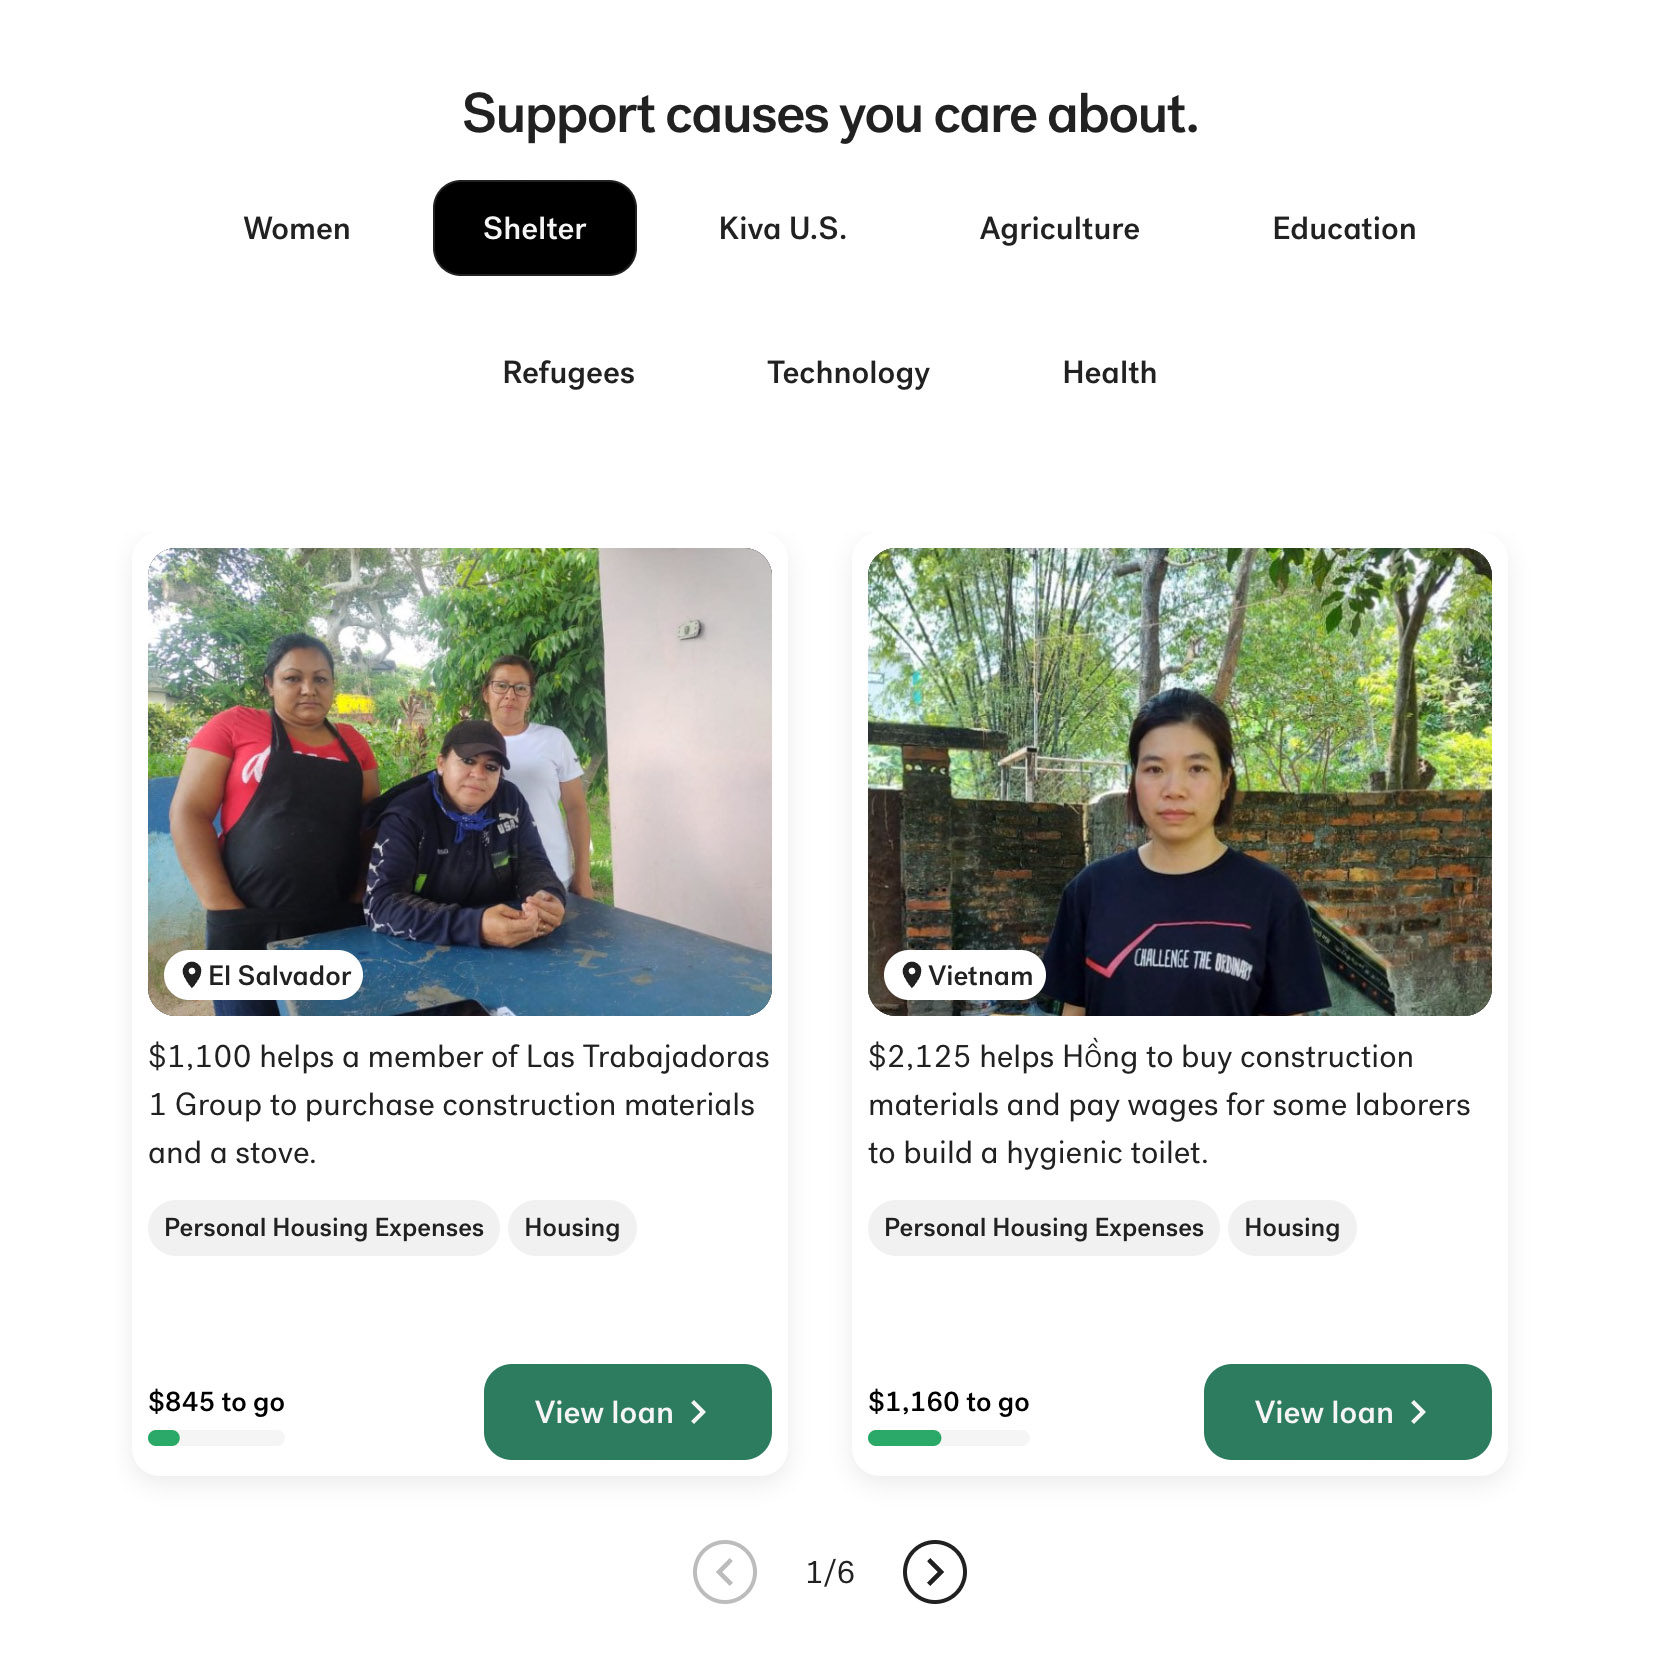 screenshot from Kiva website with headline "Support causes you care about" with section headers, Women, Shelter, Kiva U.S., Agriculture, Education, Refugees, Technology, and Health